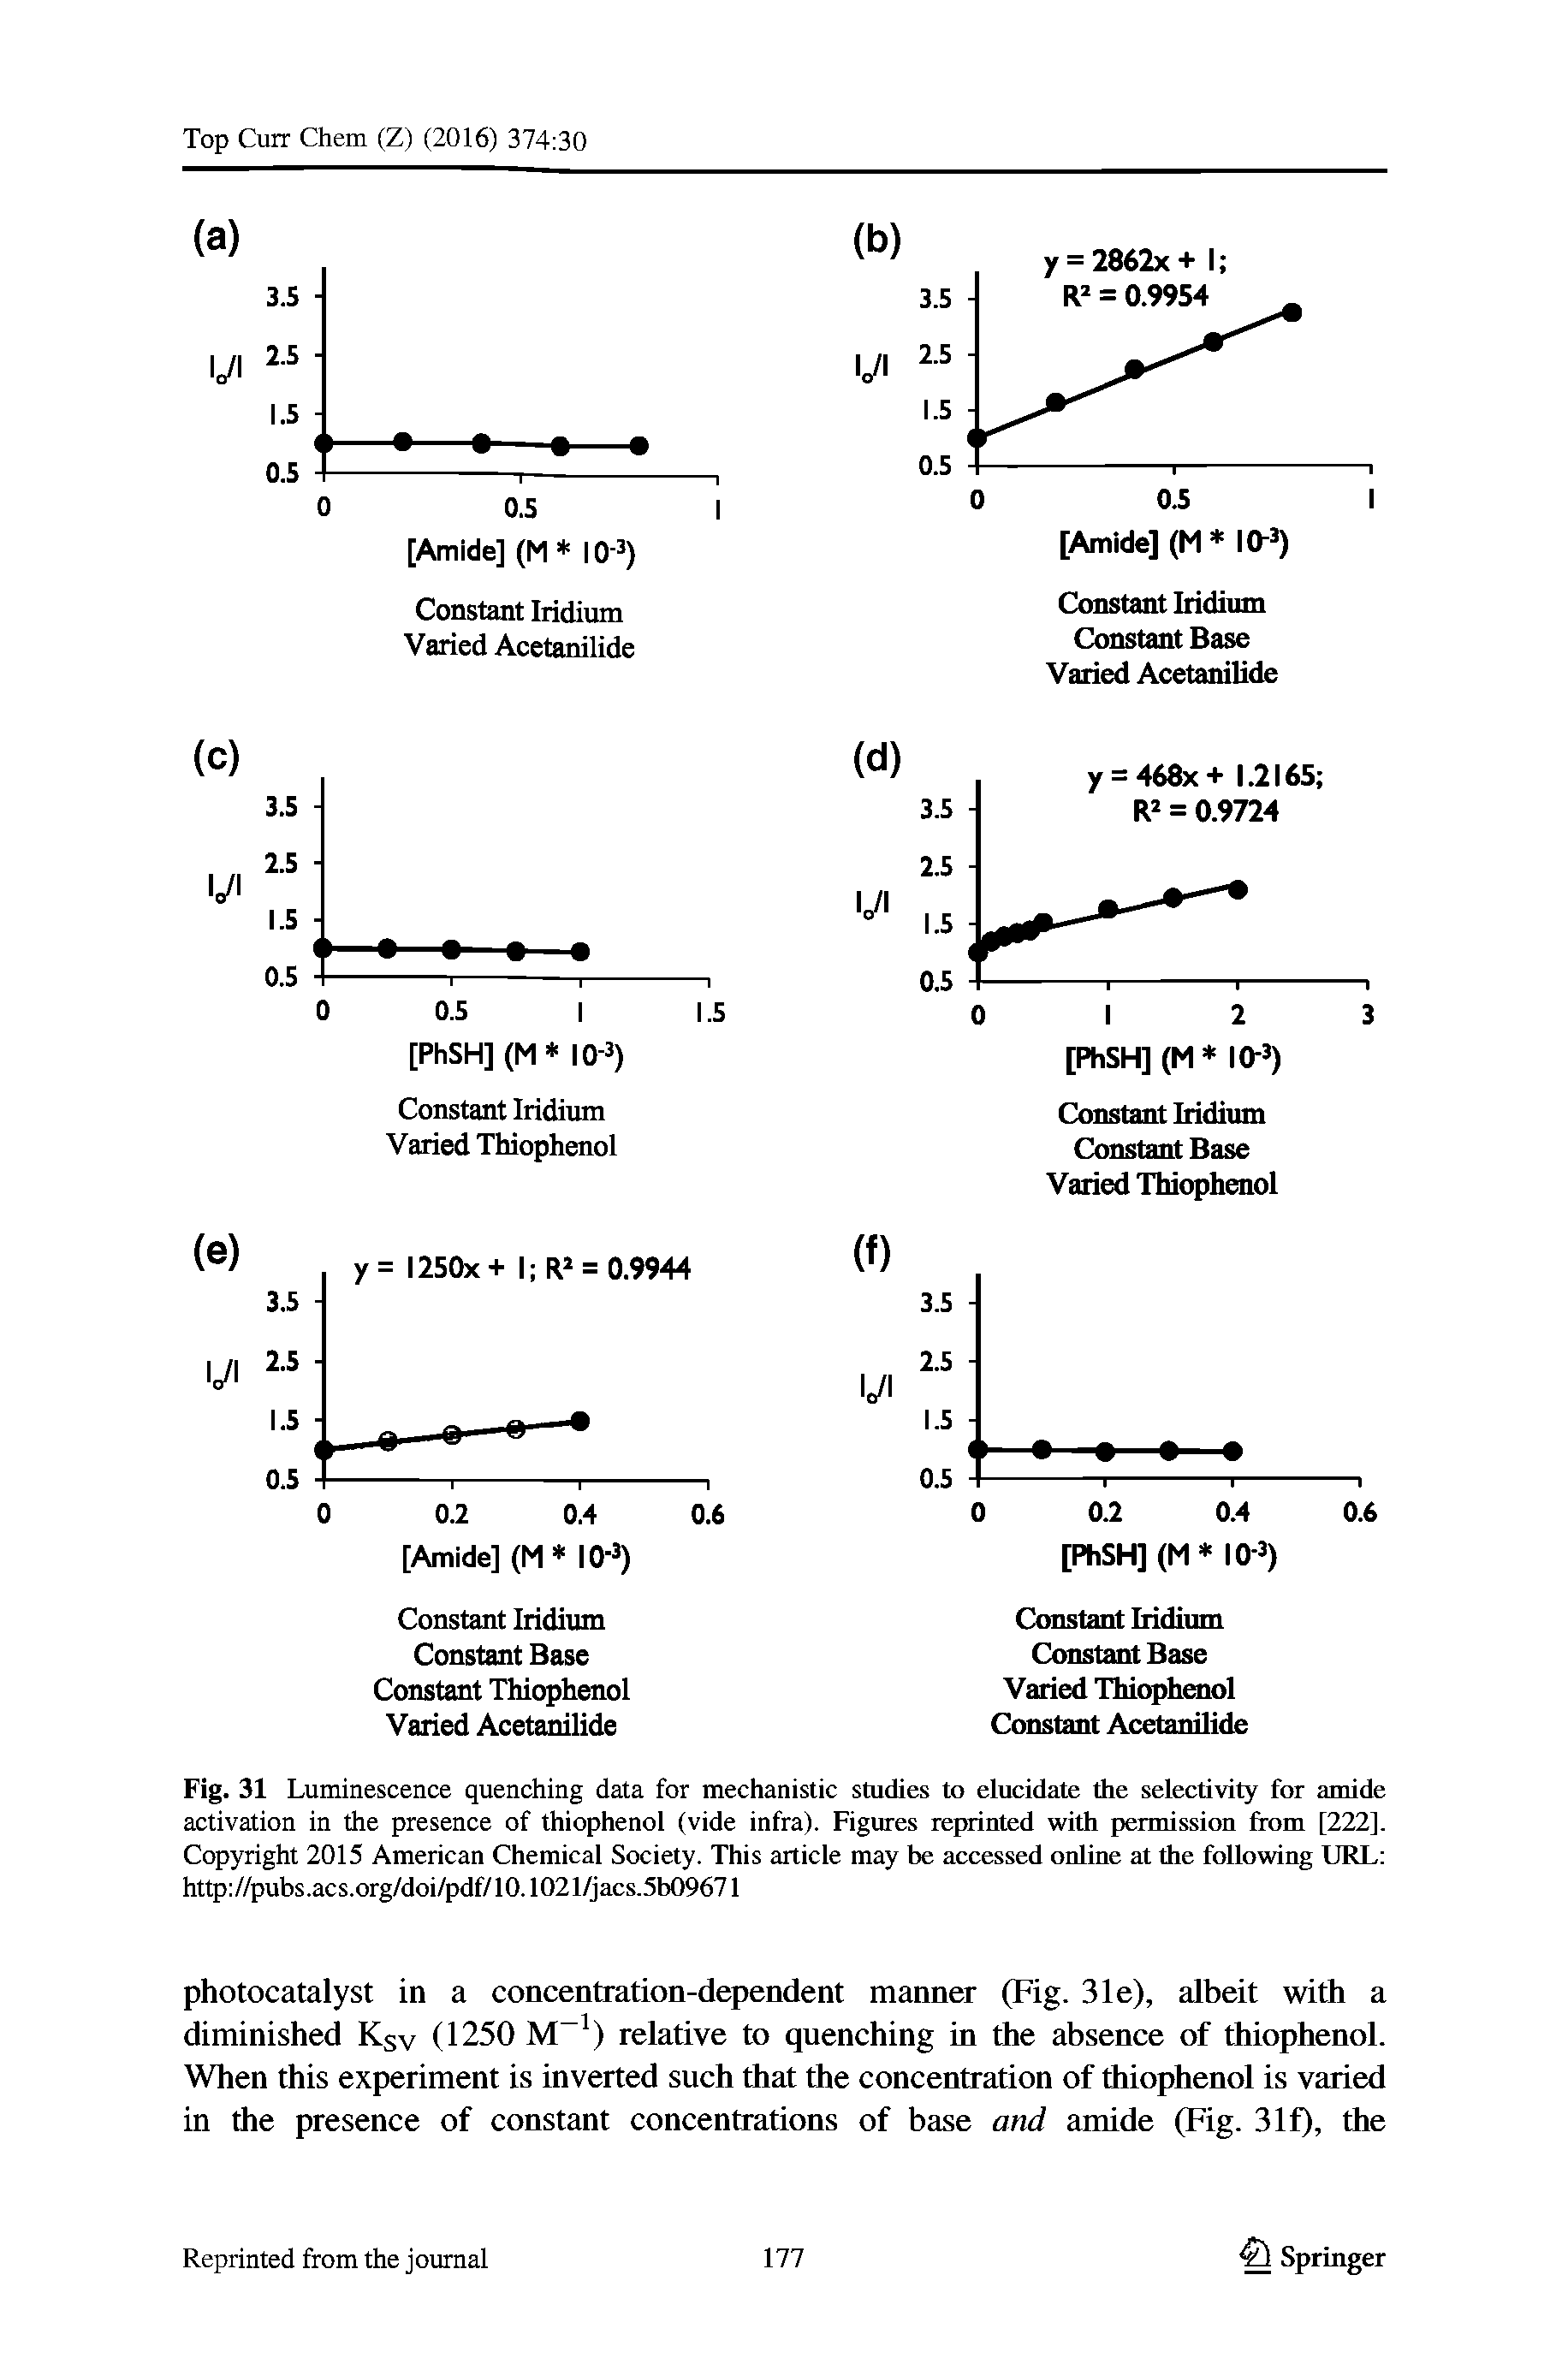 Fig. 31 Luminescence quenching data for mechanistic studies to eiucidale the selectivity for amide activation in the presence of thiophenol (vide infra). Figures reprinted with permission from [222]. Copyright 2015 American Chemical Society. This article may be accessed online at the following URL http //pubs.acs.org/doi/pdf/10.1021/jacs.5b09671...